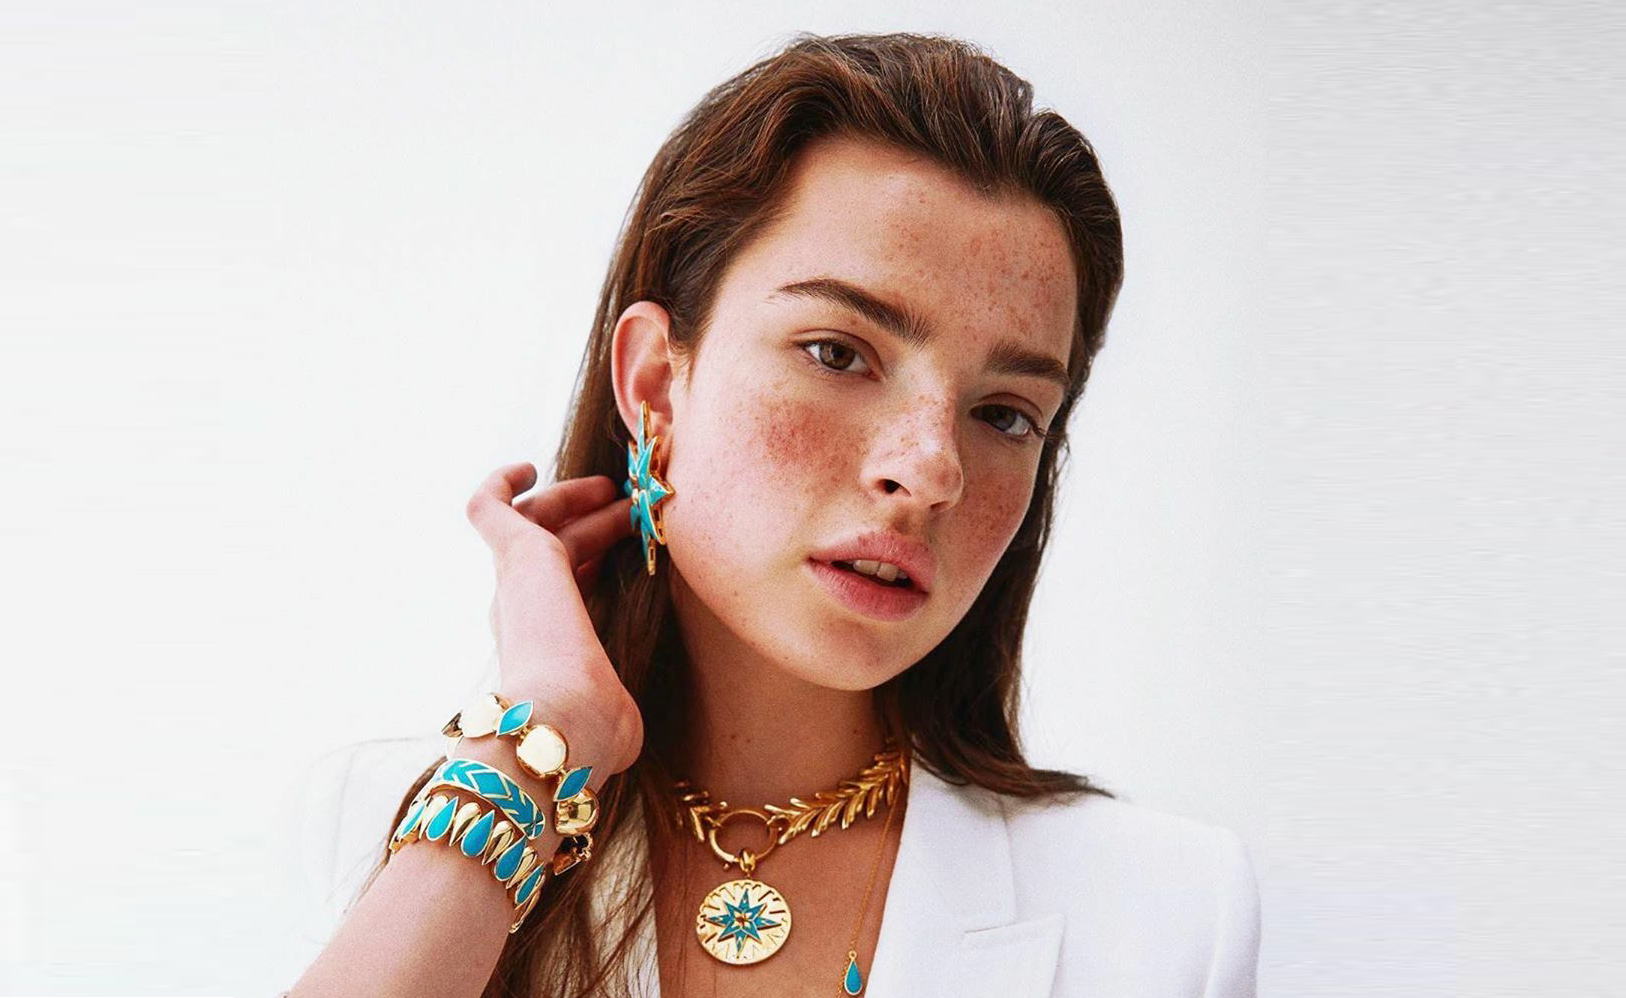 Nature Inspired and Handmade, Mer"s Jewellery's New SS19 Collection is Downright Breathtaking